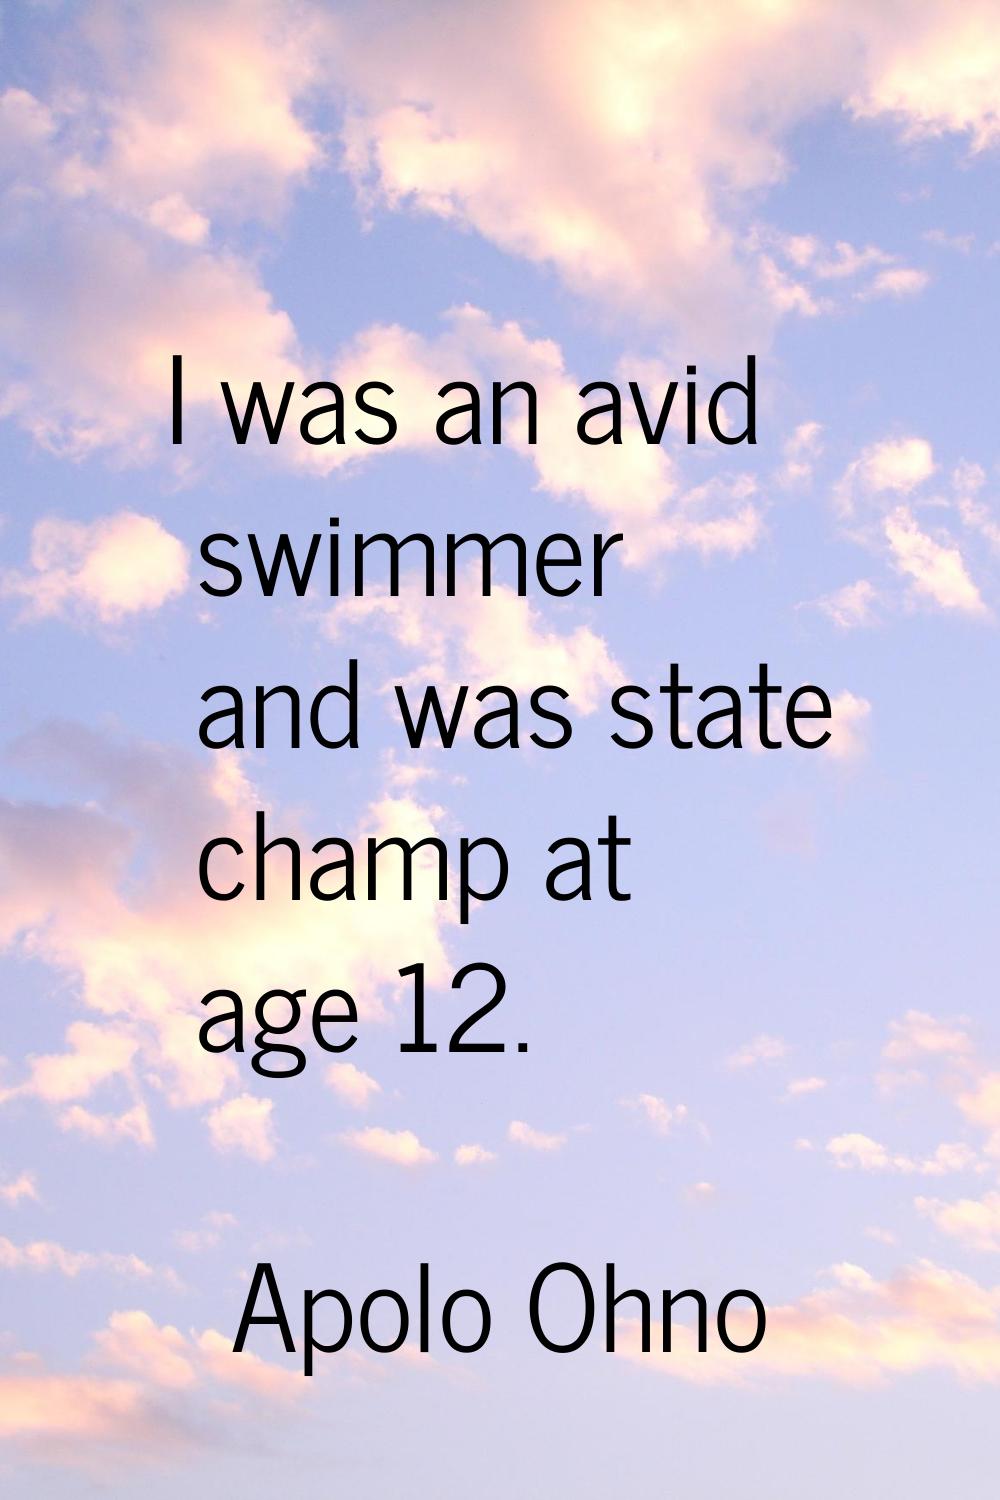 I was an avid swimmer and was state champ at age 12.